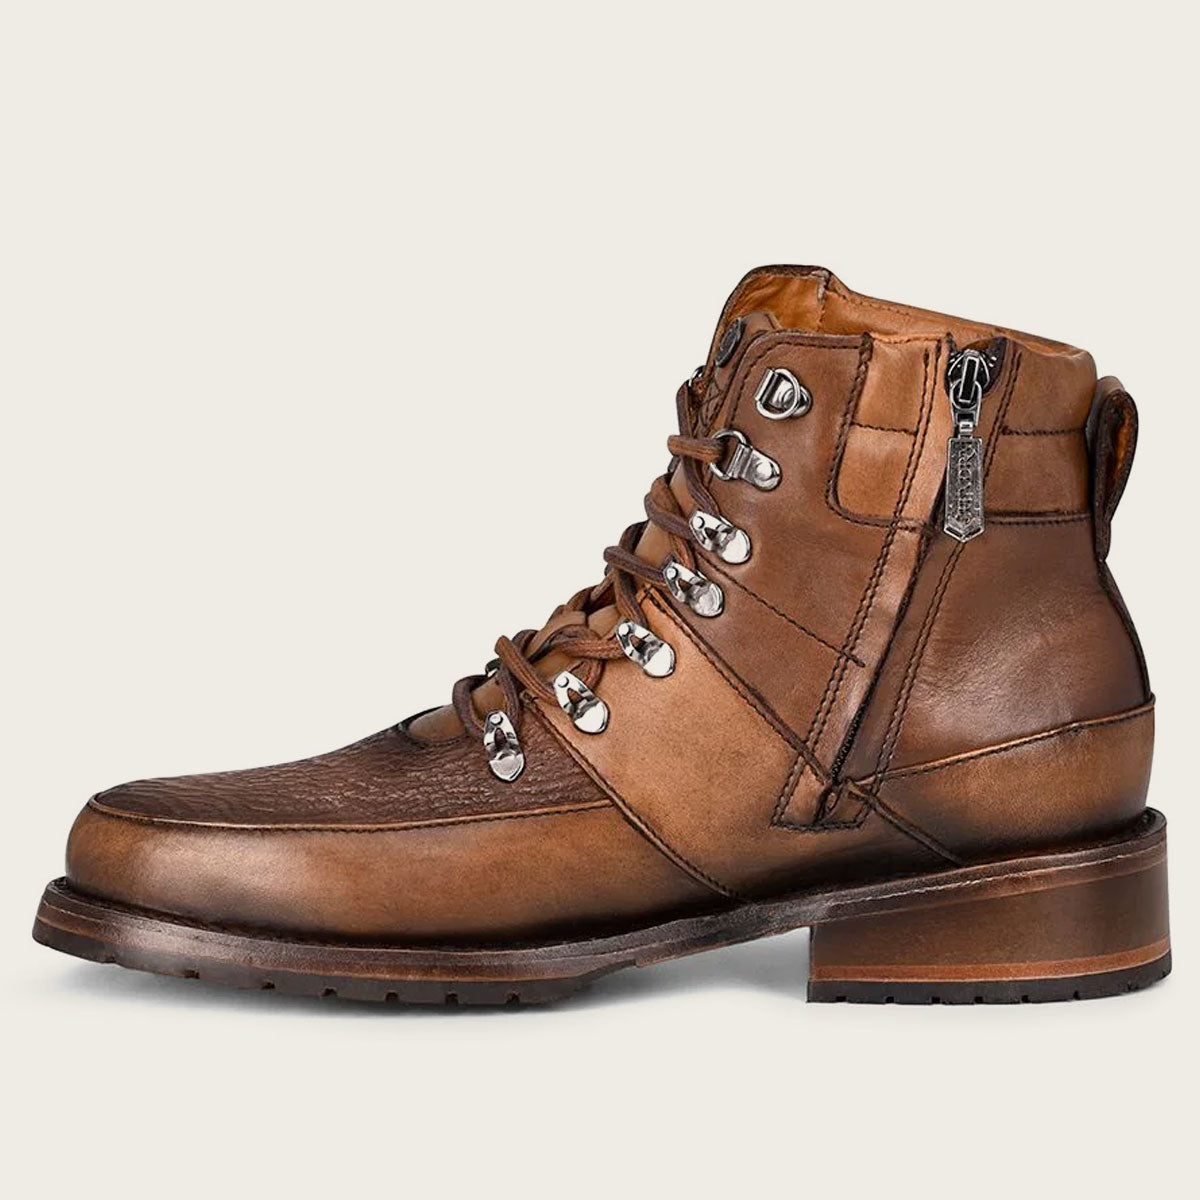 Men's brown dress ankle leather boots